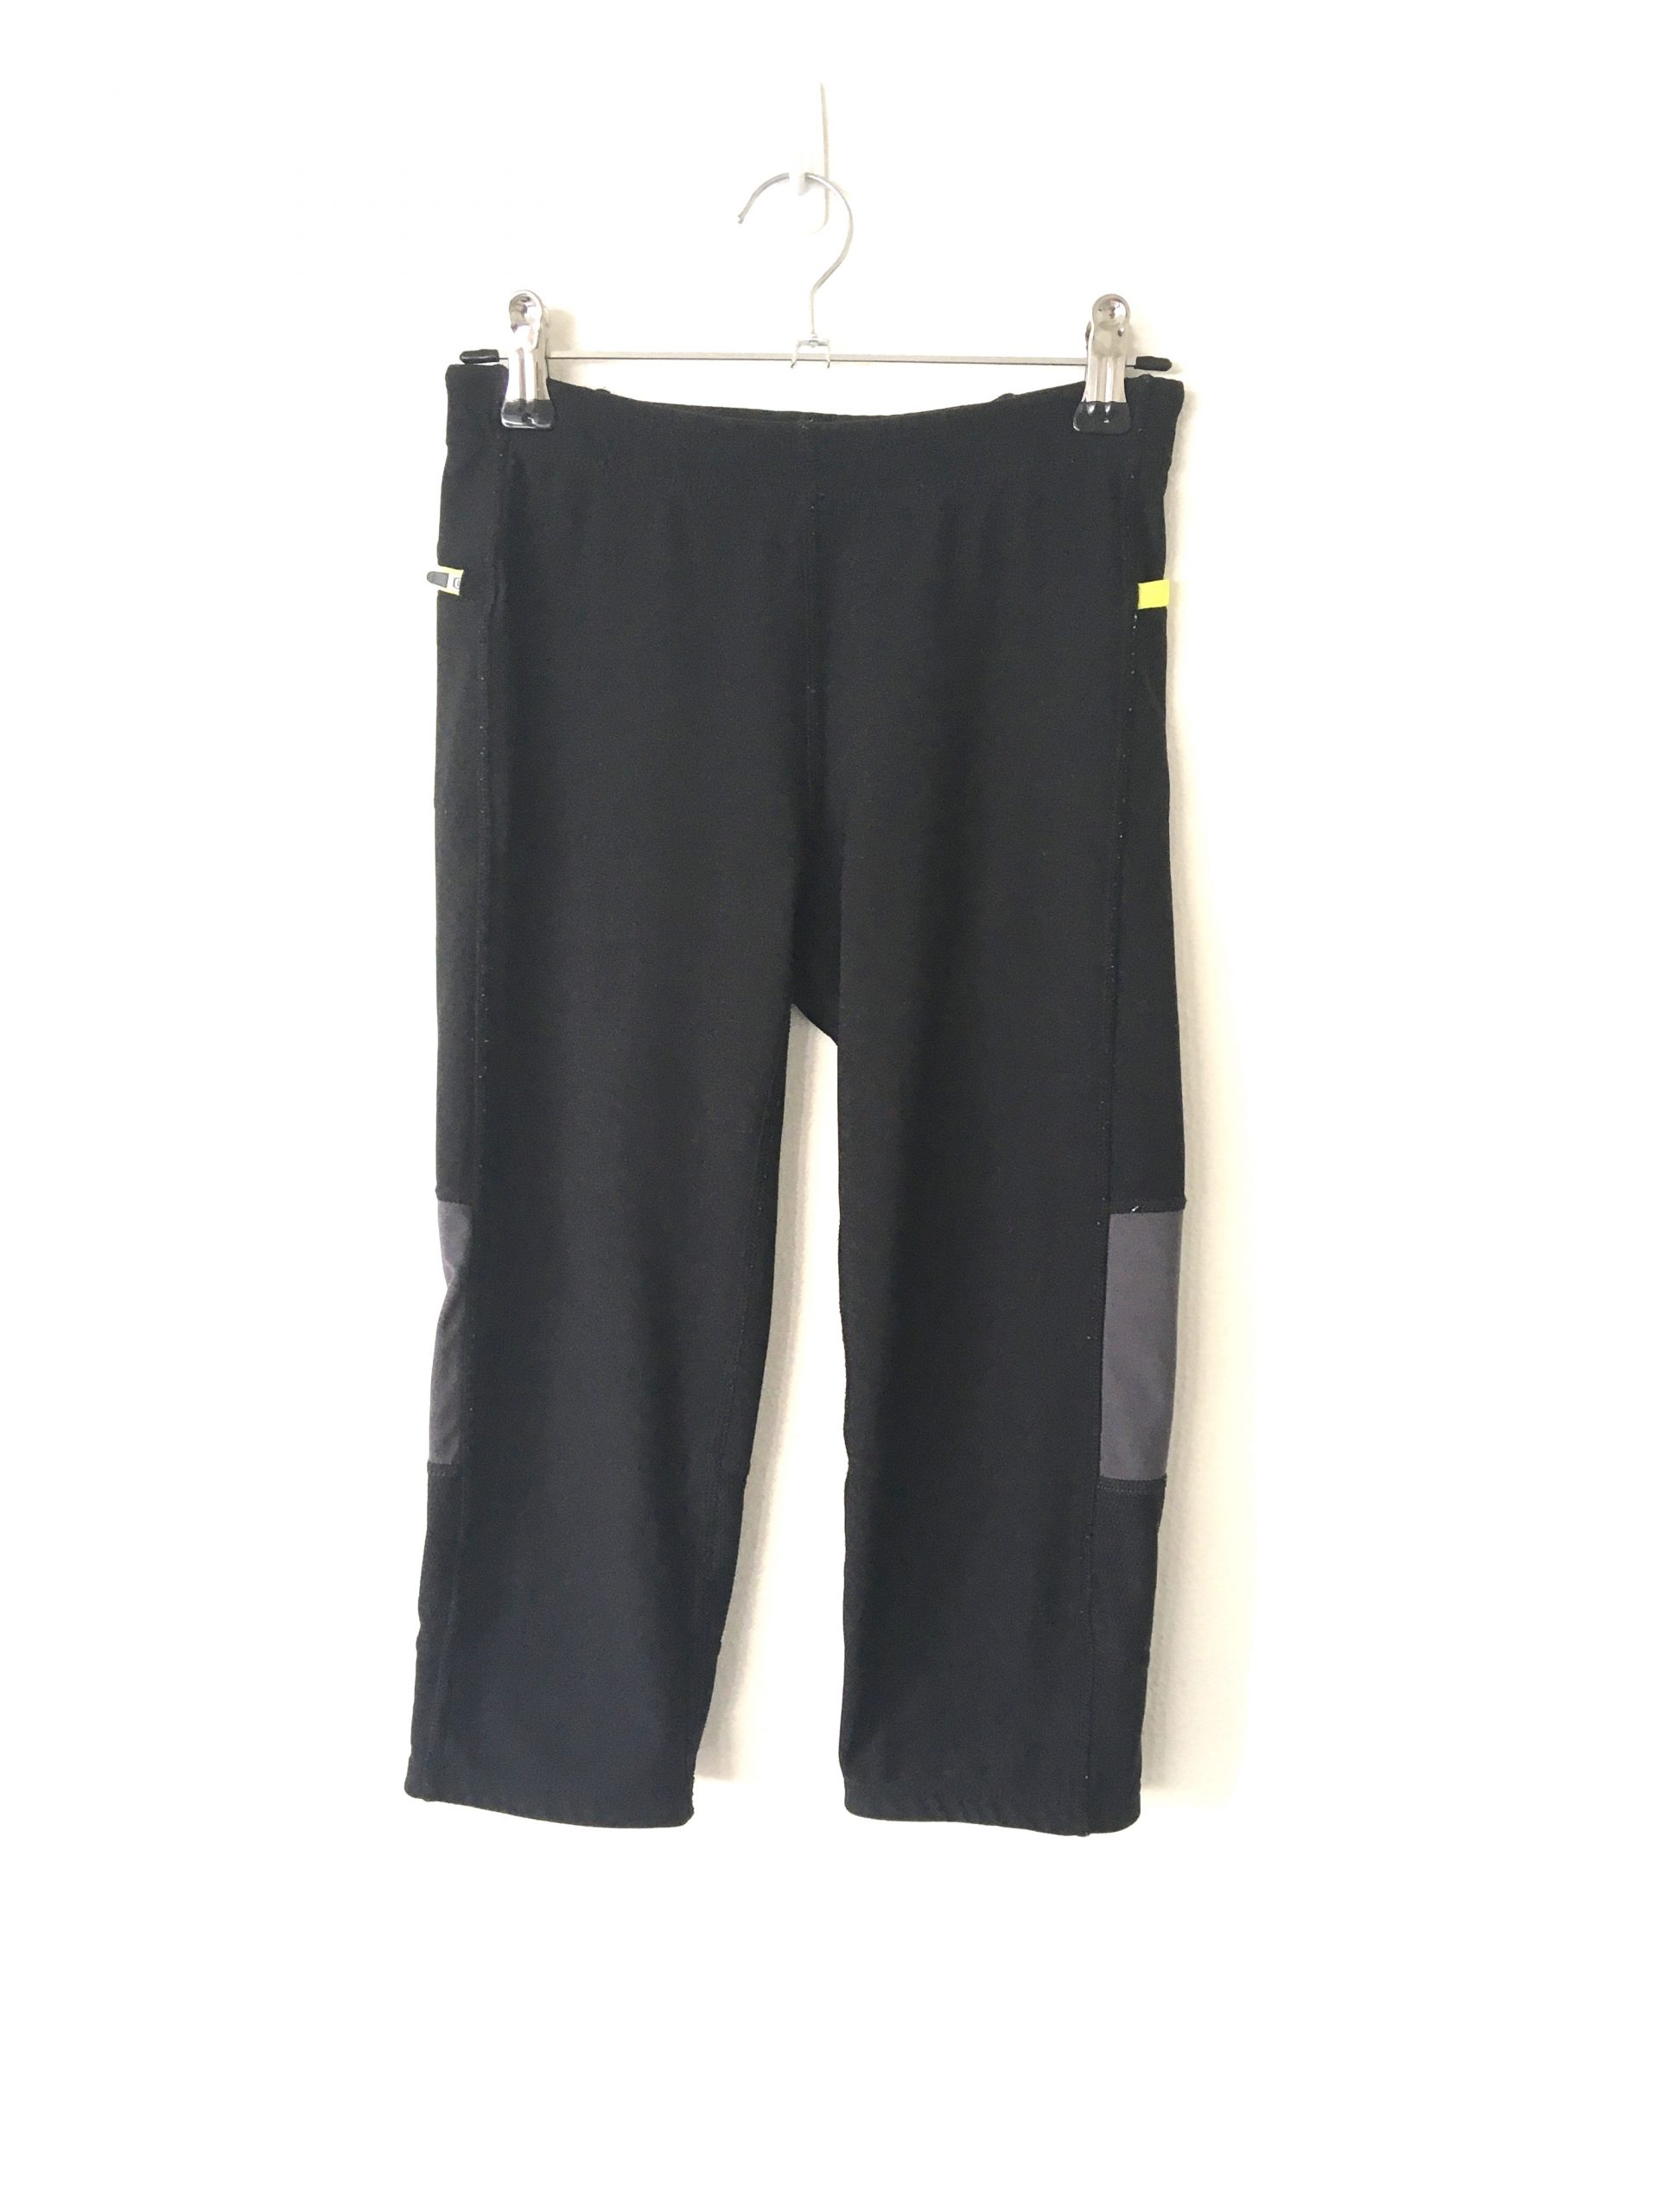 Sportsgirl Short Cropped Active Pants - Size XS - The Re: Club